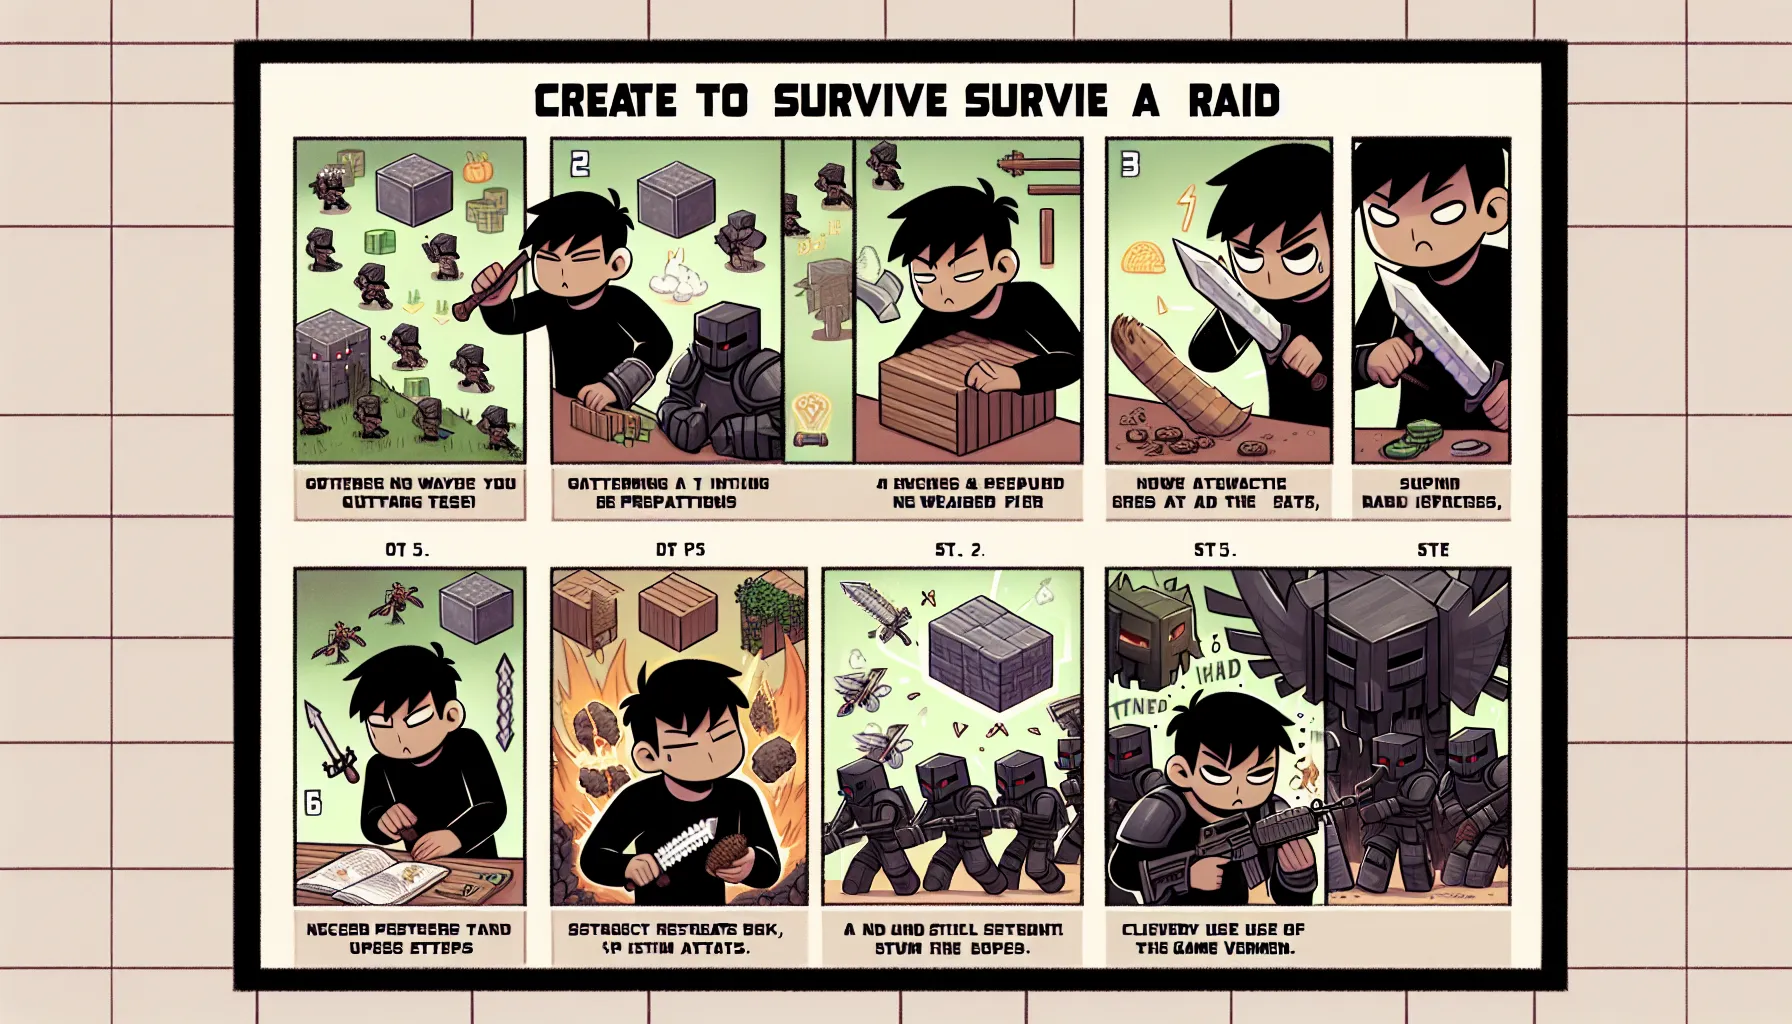 How to Start Raids in Minecraft (and Survive Them)